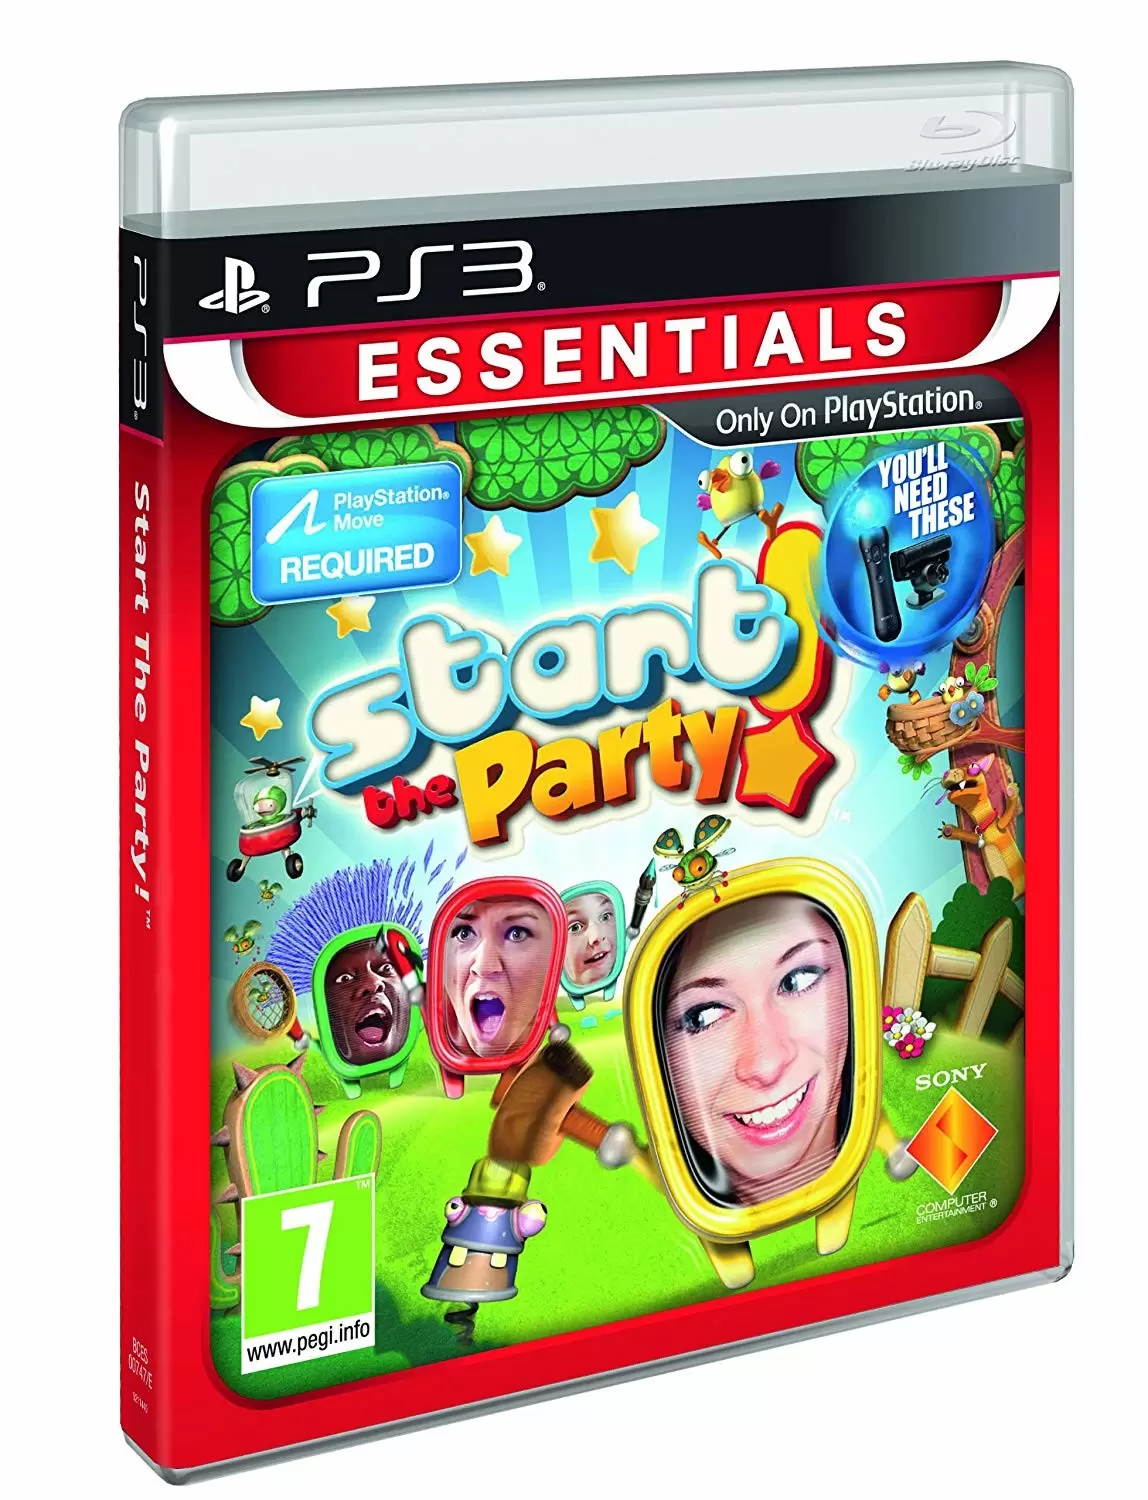 PS3 Games - Start the Party (Essentials)